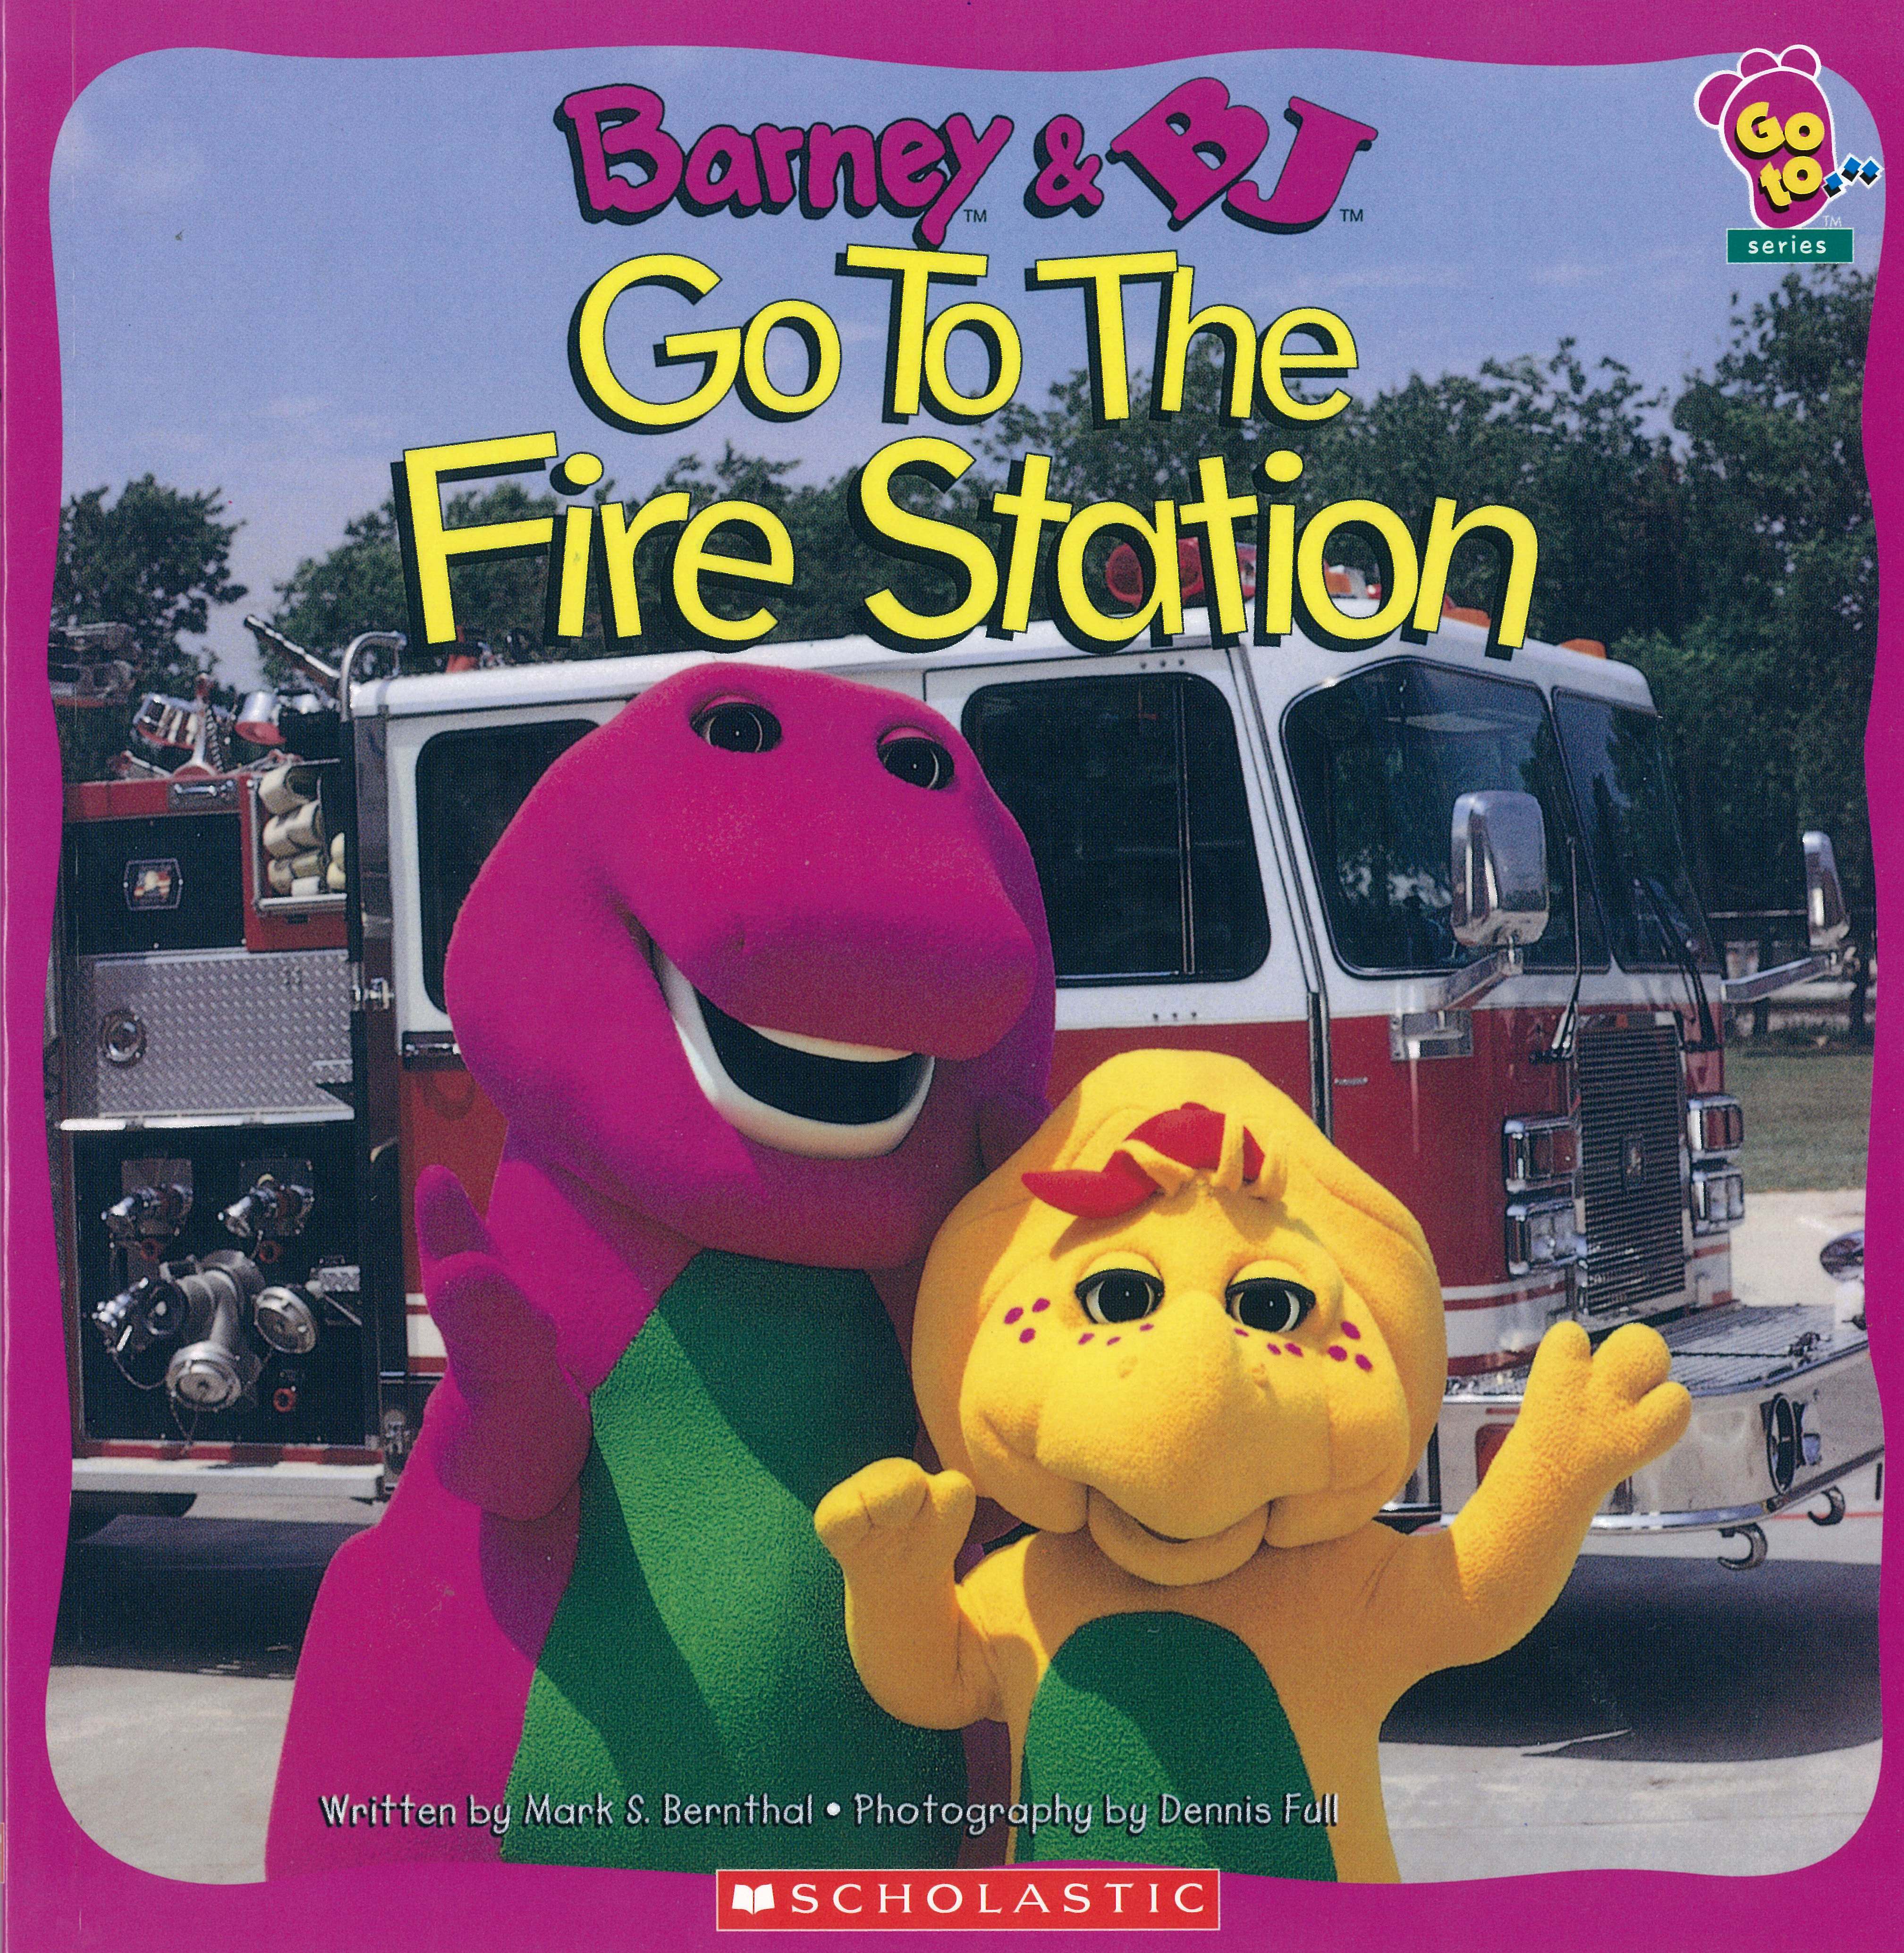 Barney &amp; Bj: Go To The Fire Station